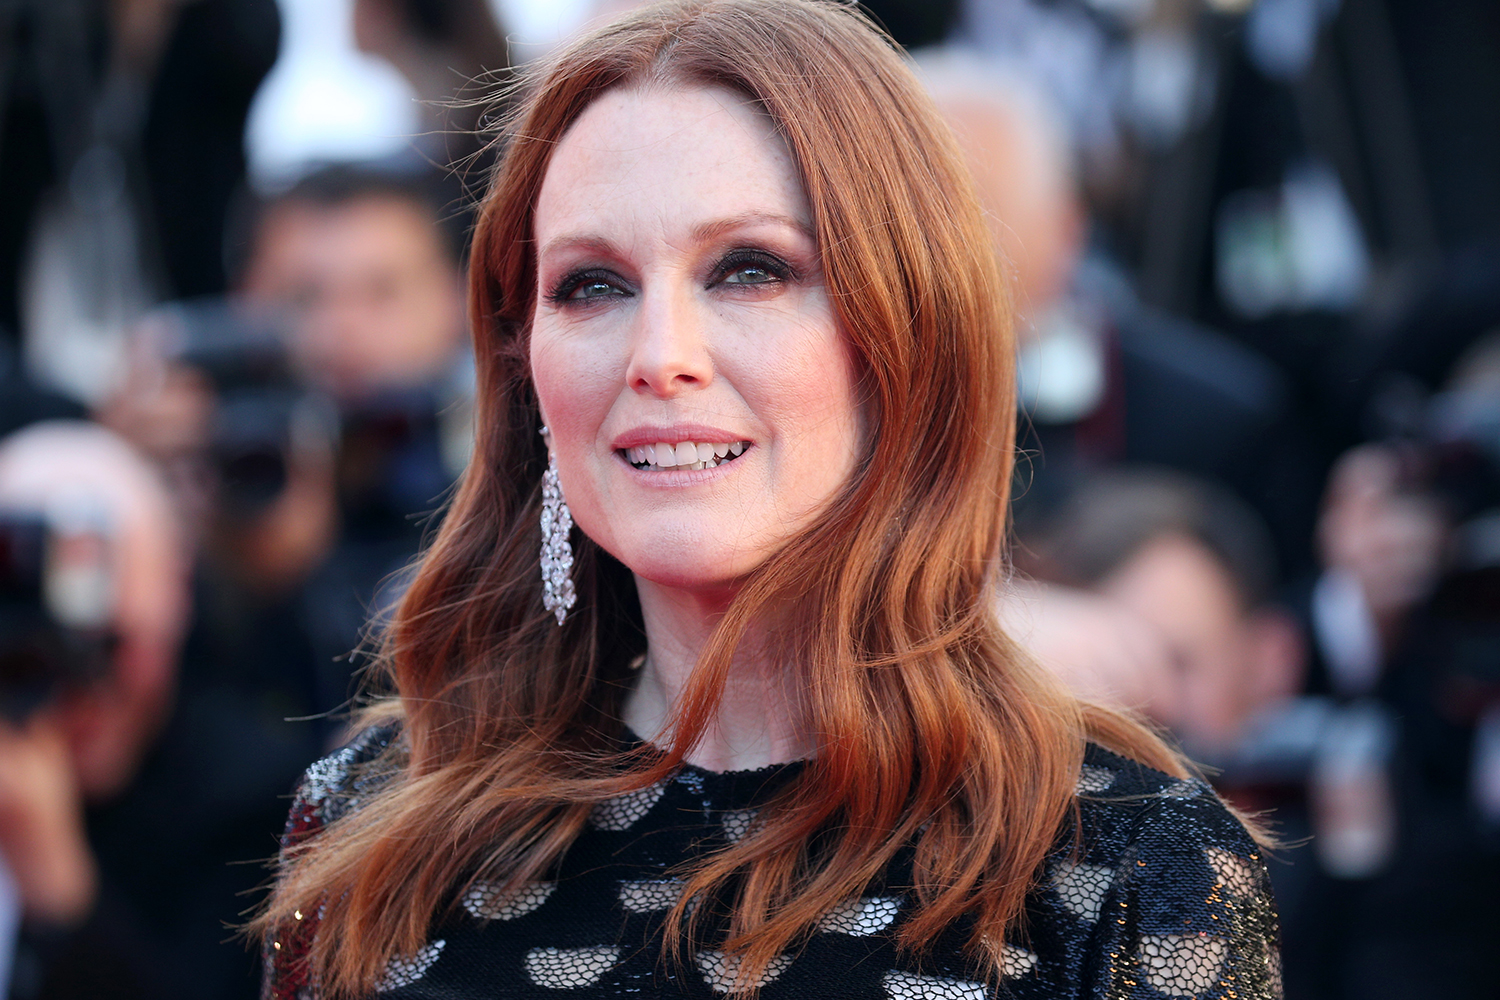 Julianne Moore Names The Director Who Sexually Harassed Her